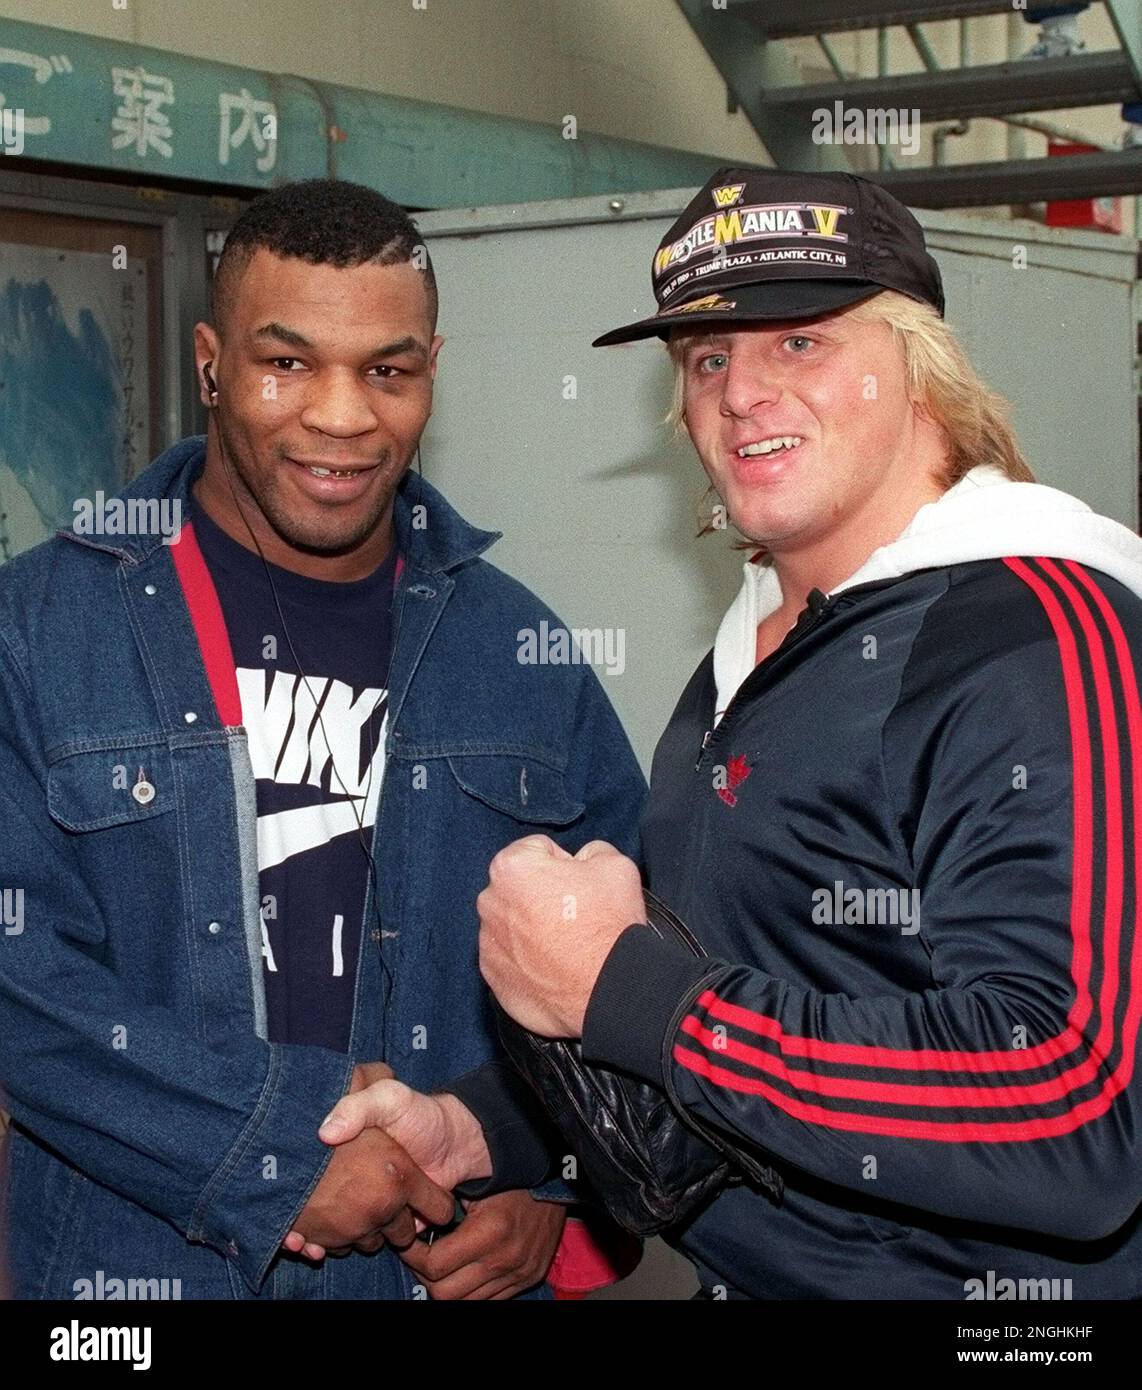 Canadian professional Wrestler Owen Hart, right, poses with heavyweight boxing champion Mike Tyson at the Korakuen gym in Tokyo, Japan on Monday, Jan. 29, 1990. Hart, a father of two, was killed in May, 1999 when he plunged to his death during a wrestling stunt at Kemper Arena in Kansas City. (AP Photo/Tsugufumi Matsumoto) Stock Photo